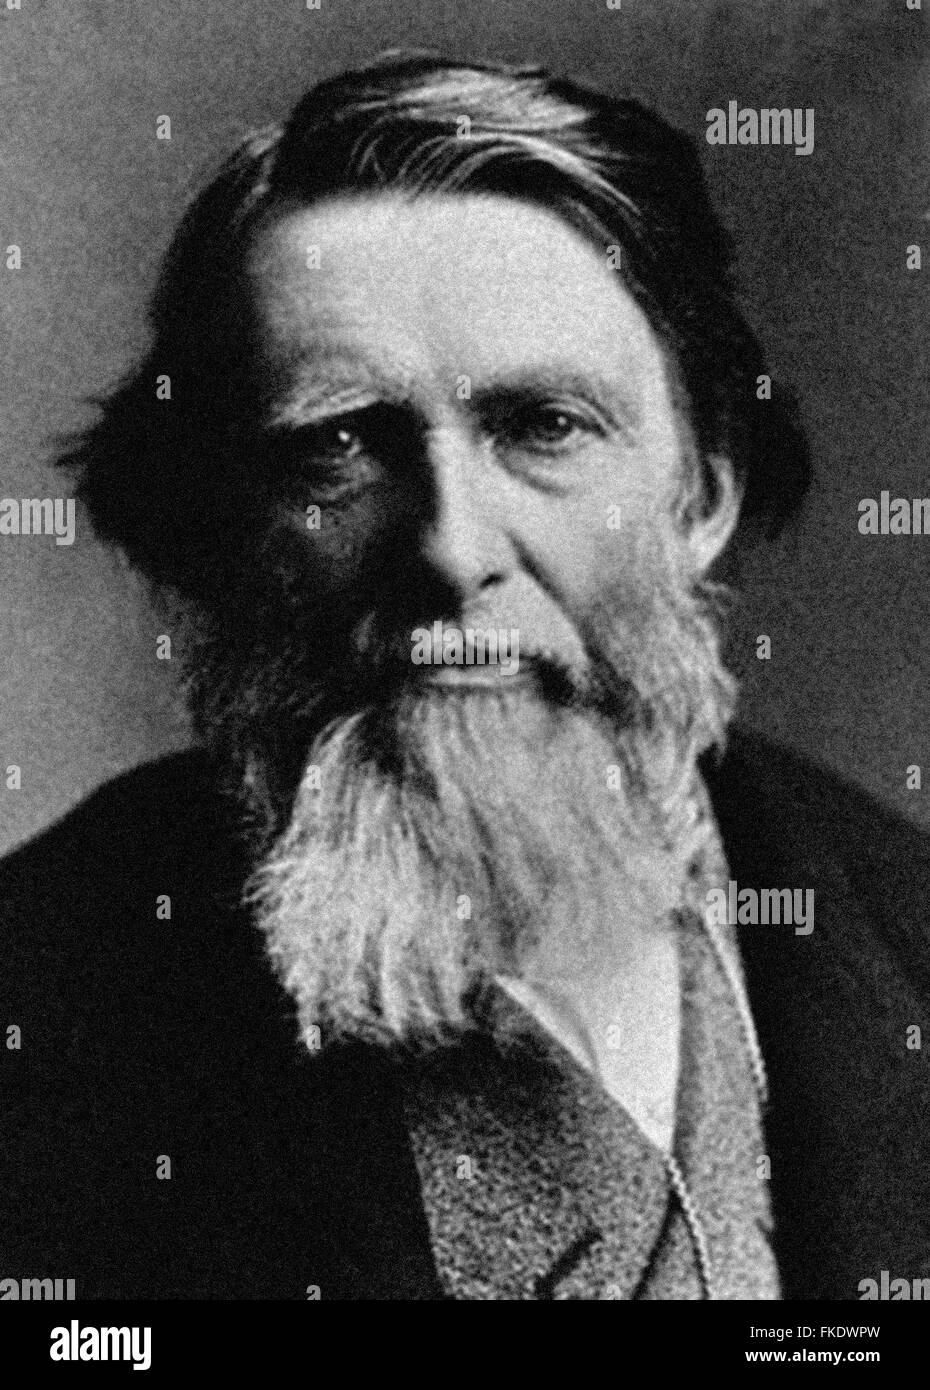 John RUSKIN (b1819) was and English artist and art critic. From the archives of Press Portrait Service - formerly Press Portrait Bureau. Stock Photo